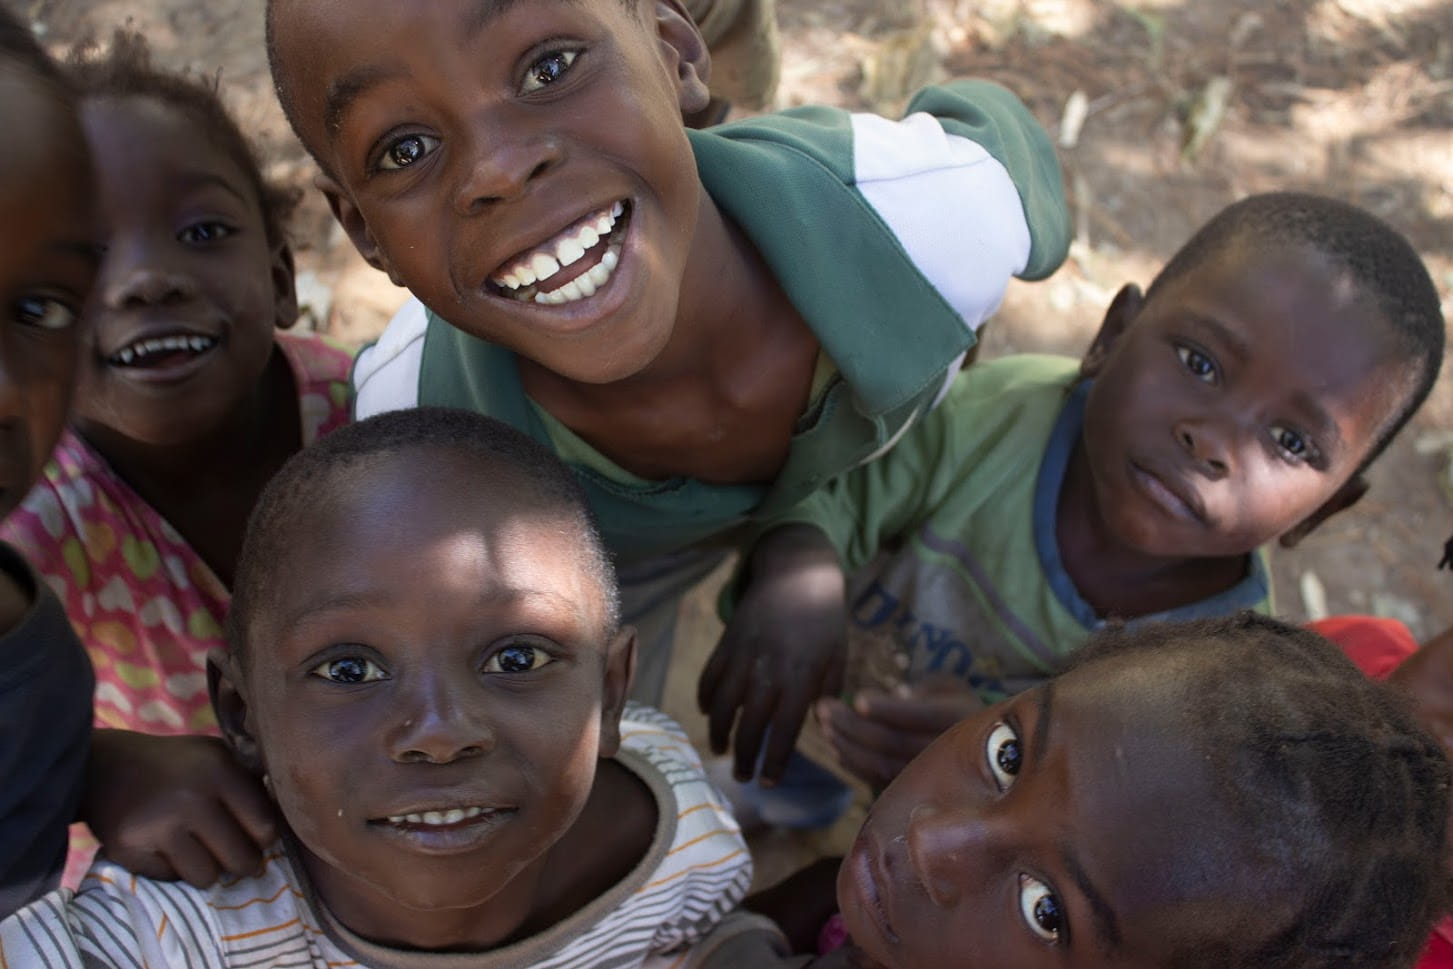 Kids in Zambia Looking Up and Smiling